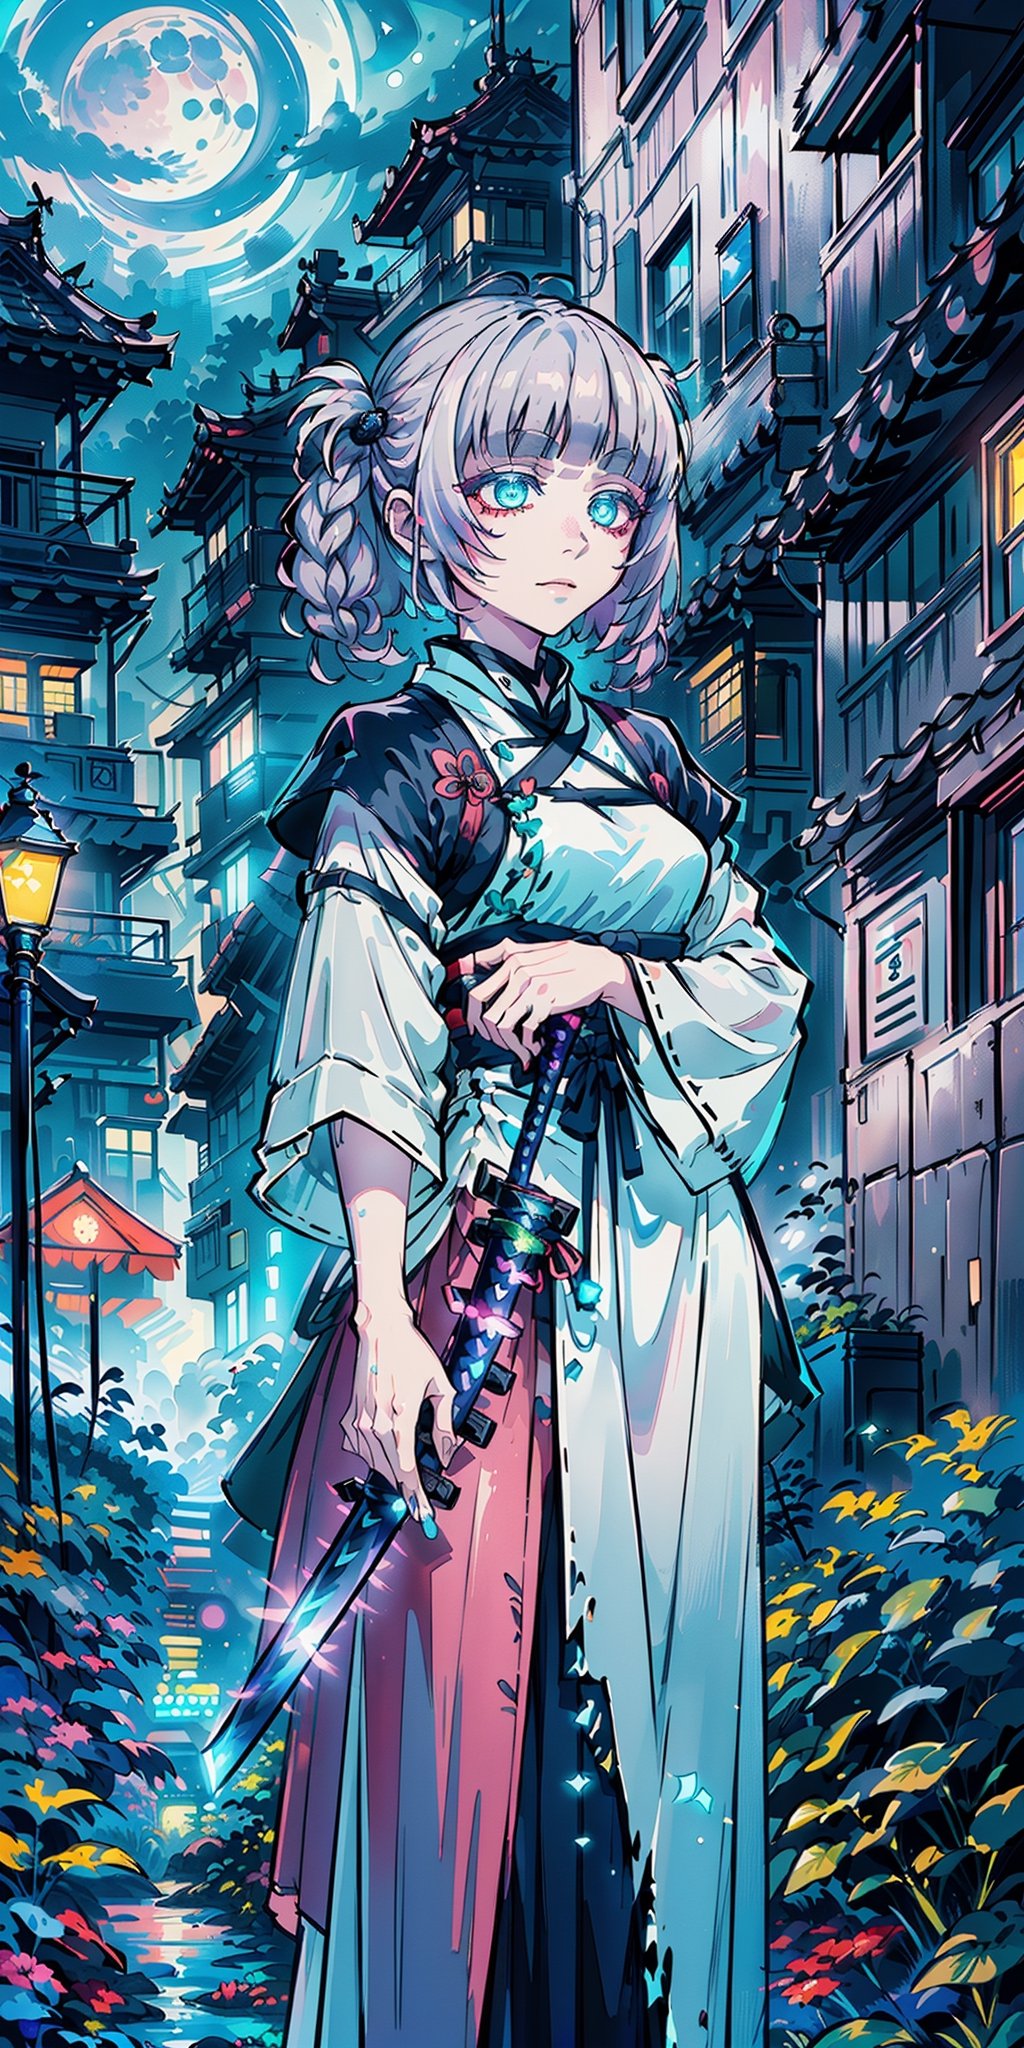 (datamoshing:1.5), (8k uhd, masterpiece, best quality, high quality,ultra-detailed, detailed background, depth of field), (beautiful, aesthetic, perfect, delicate, intricate:1.2), (1girl), (solo), (human, emerald eyes:1.3), (cyberpunk style, aodai cyber,moonlight, (clutching katana, blade gleaming under the moonlight:1.4), swift rust, leaves, magical, (serene background:1.3), Chrysanthemum, fierce, smirking, determined eyes, spectral moon, mysterious, faint mist, water surface, silver lighting, eyes glittering (poorly_lit, dark moonlight:1.3), fantasy,nanakusa nazuna,pink_hair,